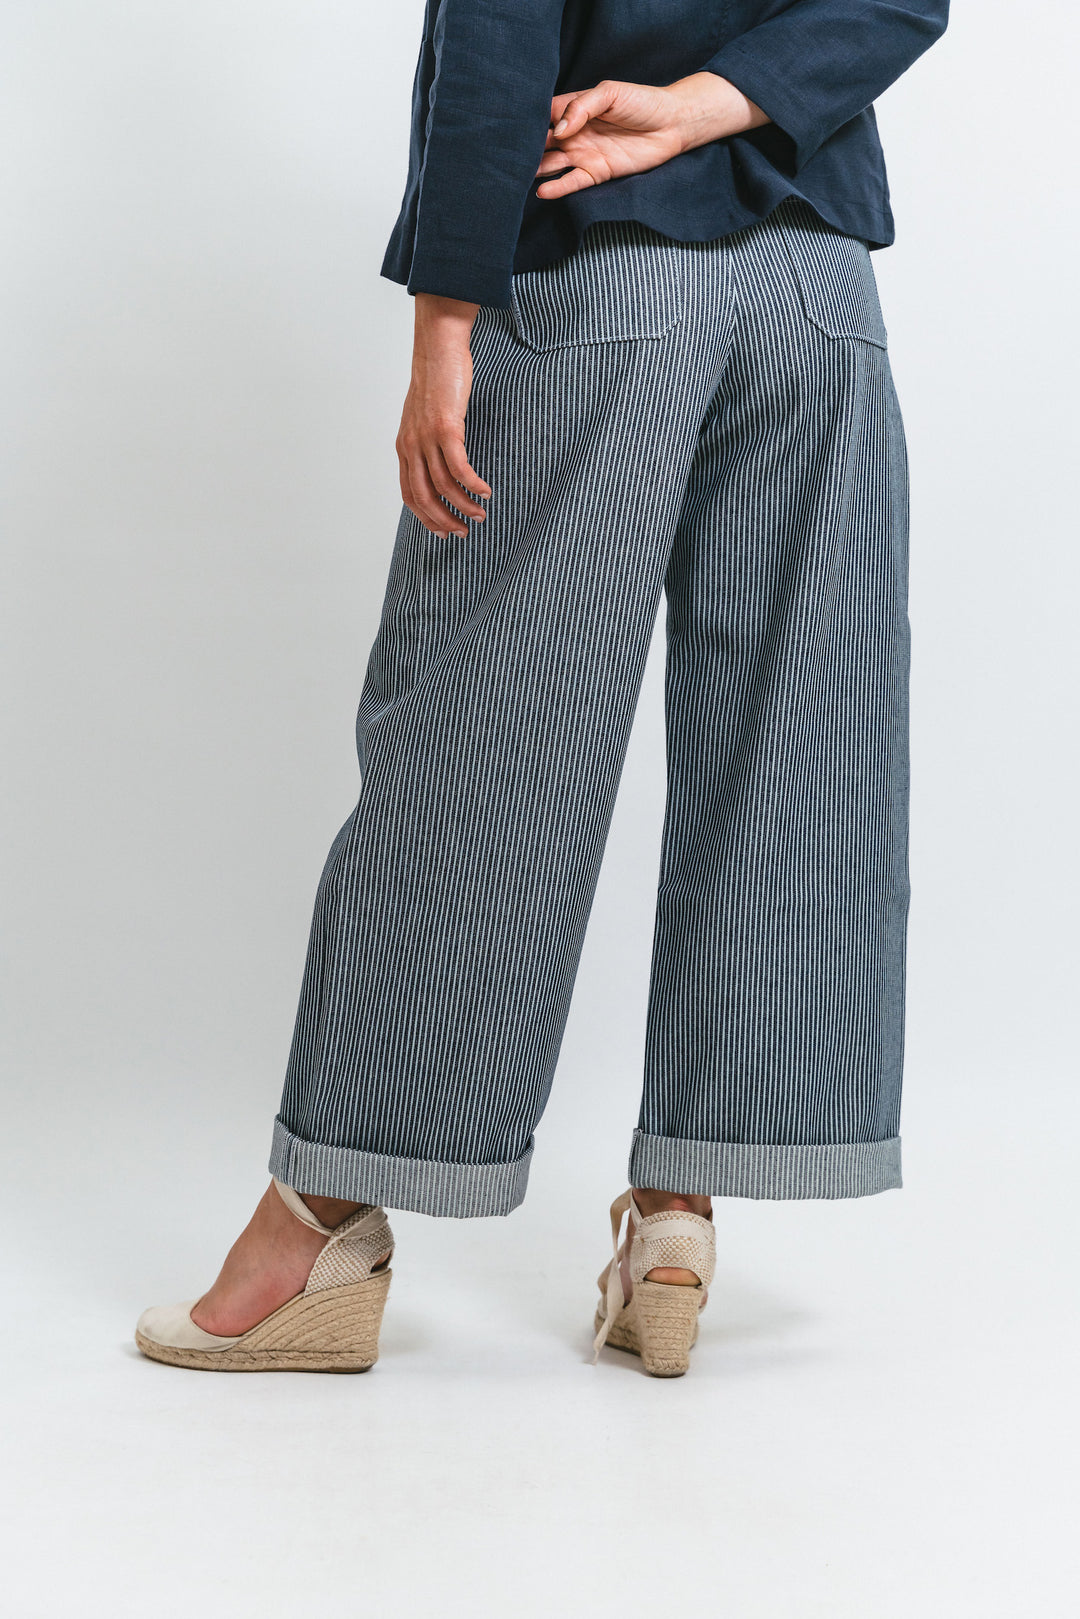 Hickory Stripes women's trousers